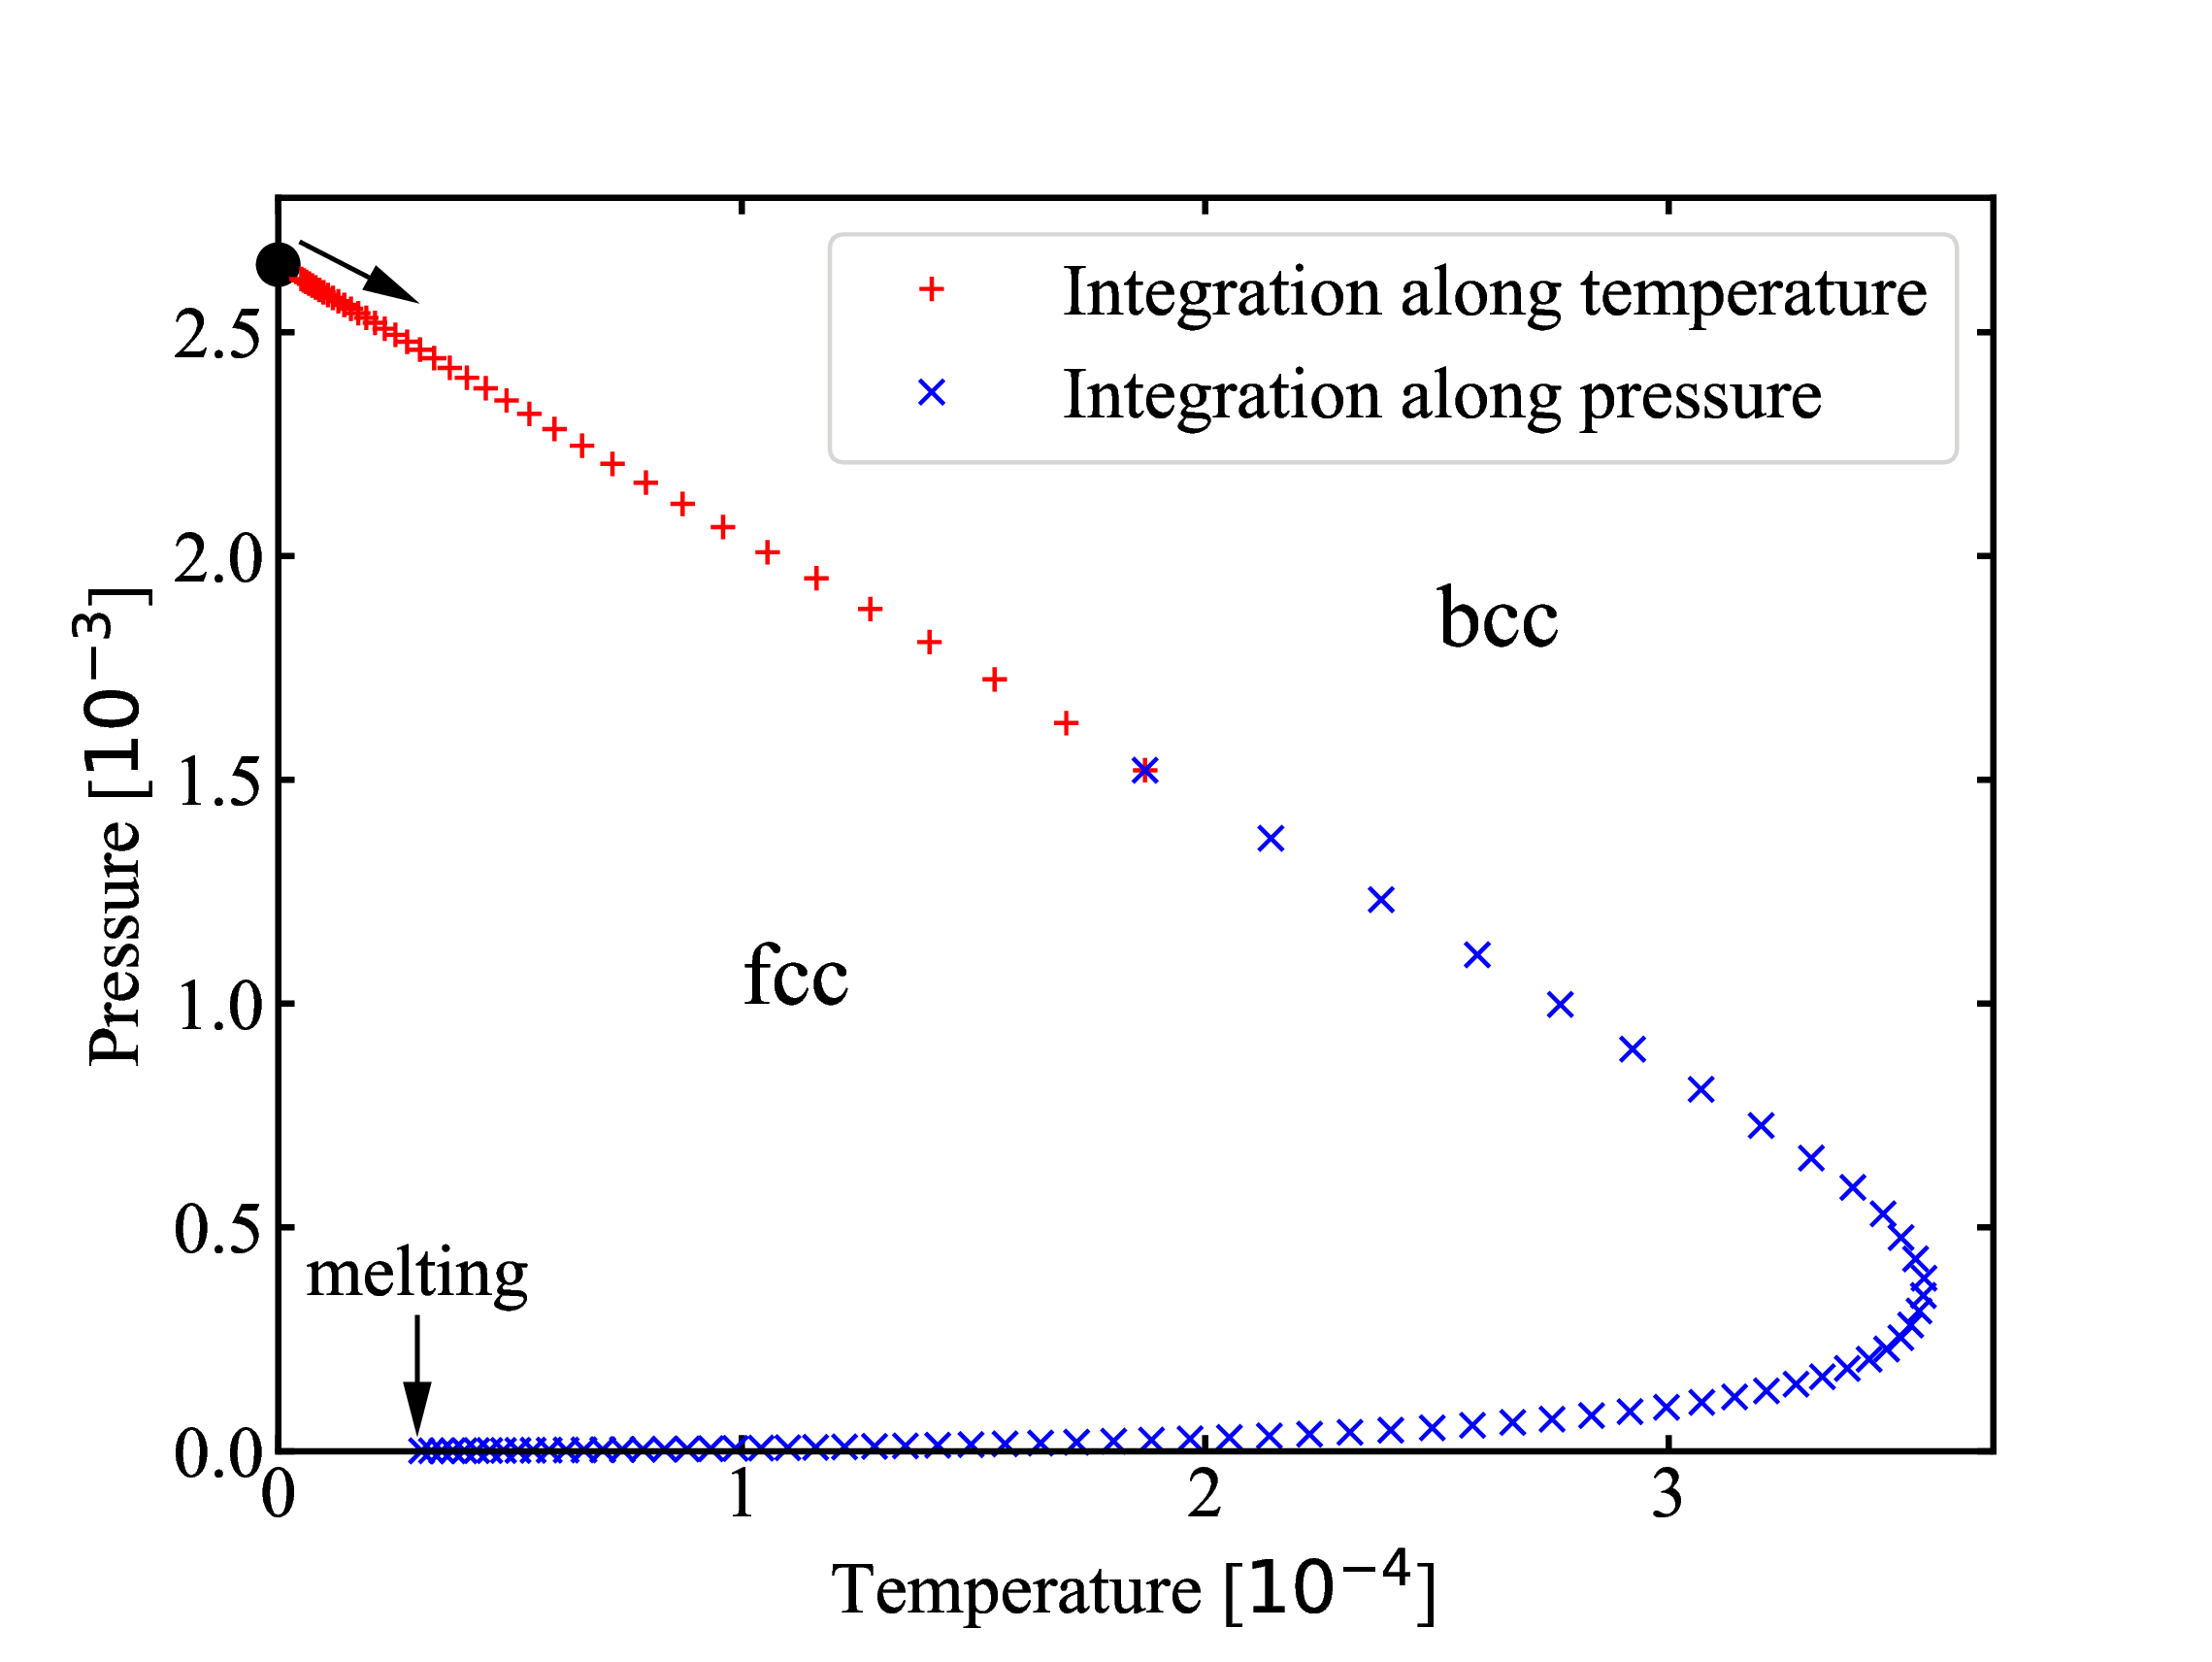 JCP_150_174501_2019_data/fig/fig4.png